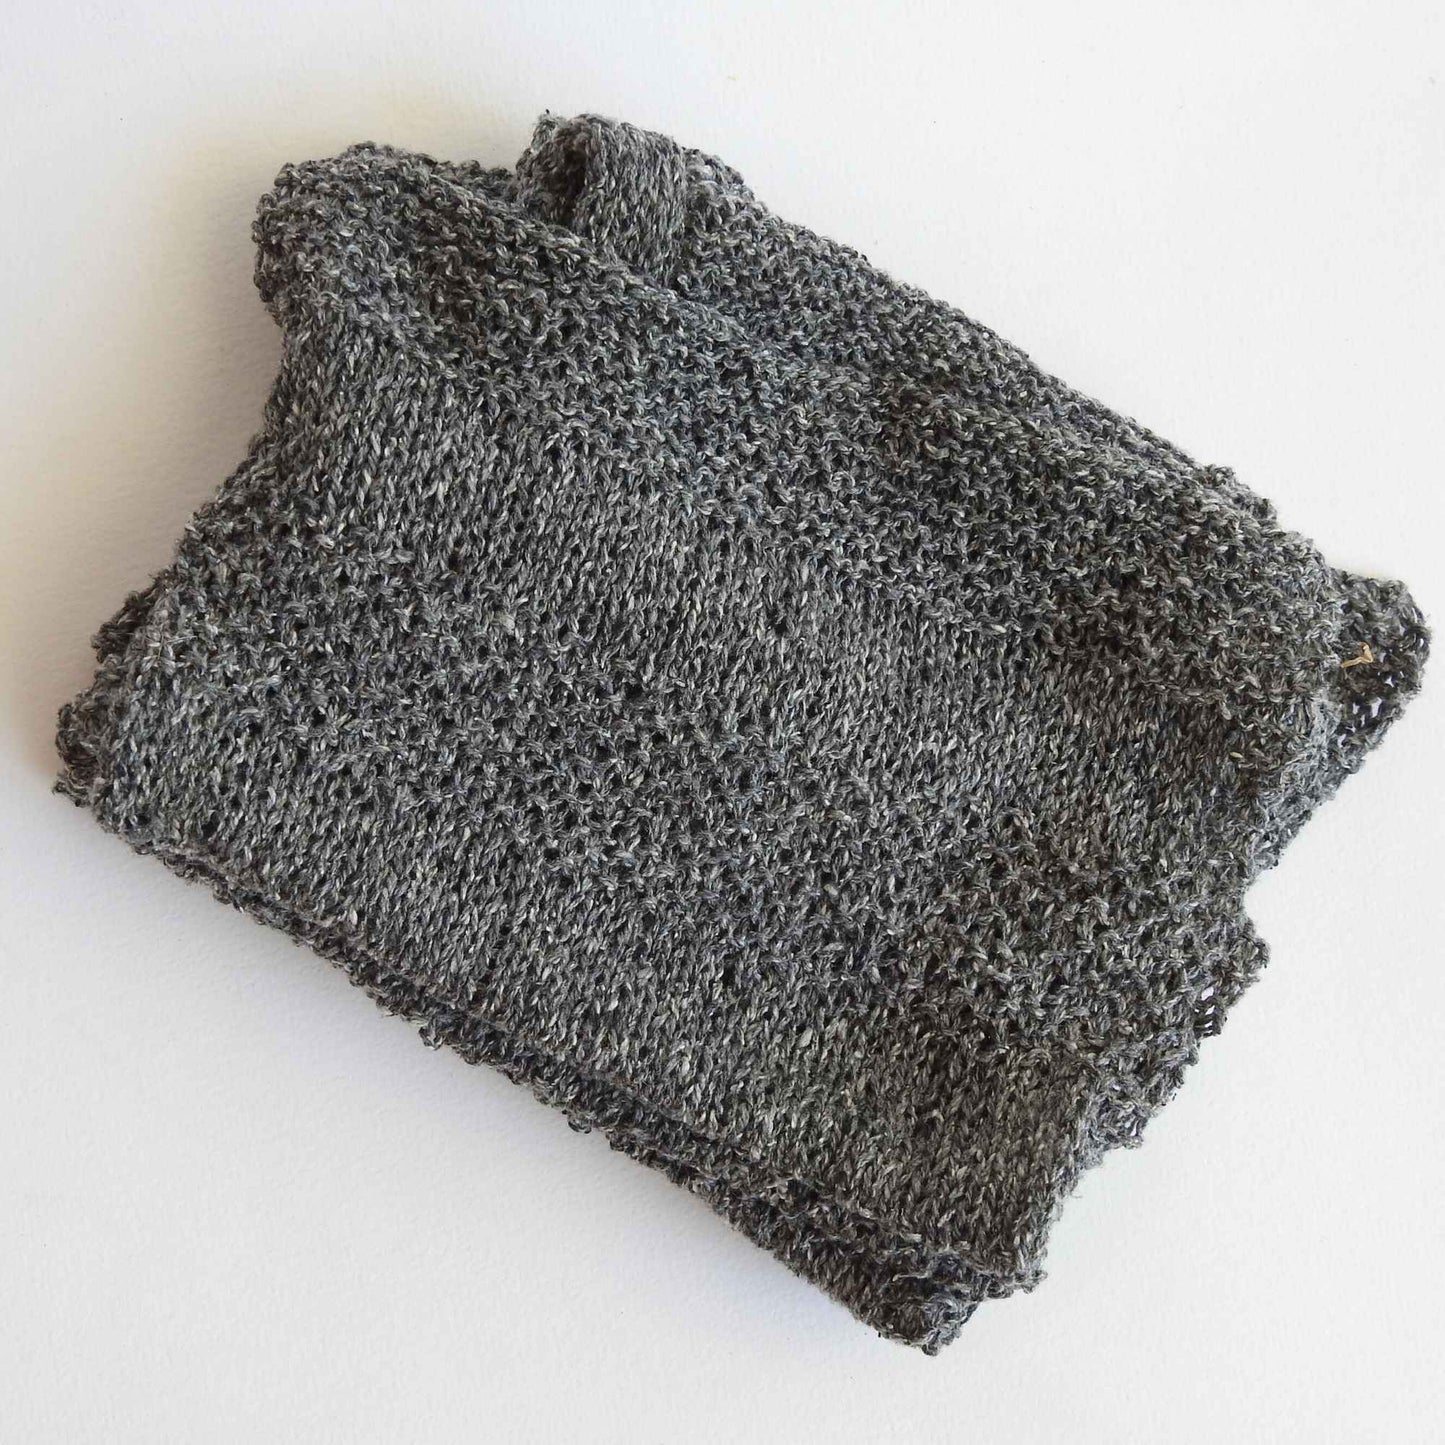 
                  
                    Habu Tsumugi Silk Yarn in #2 Medium Gray - knitted sample. Japanese Slub Silk on cone for weaving, knitting and crochet. Create beautiful, soft garments, jewelry, bags, scarves, shawls and wraps. Lace yarn with texture. Habu Textiles A-1
                  
                